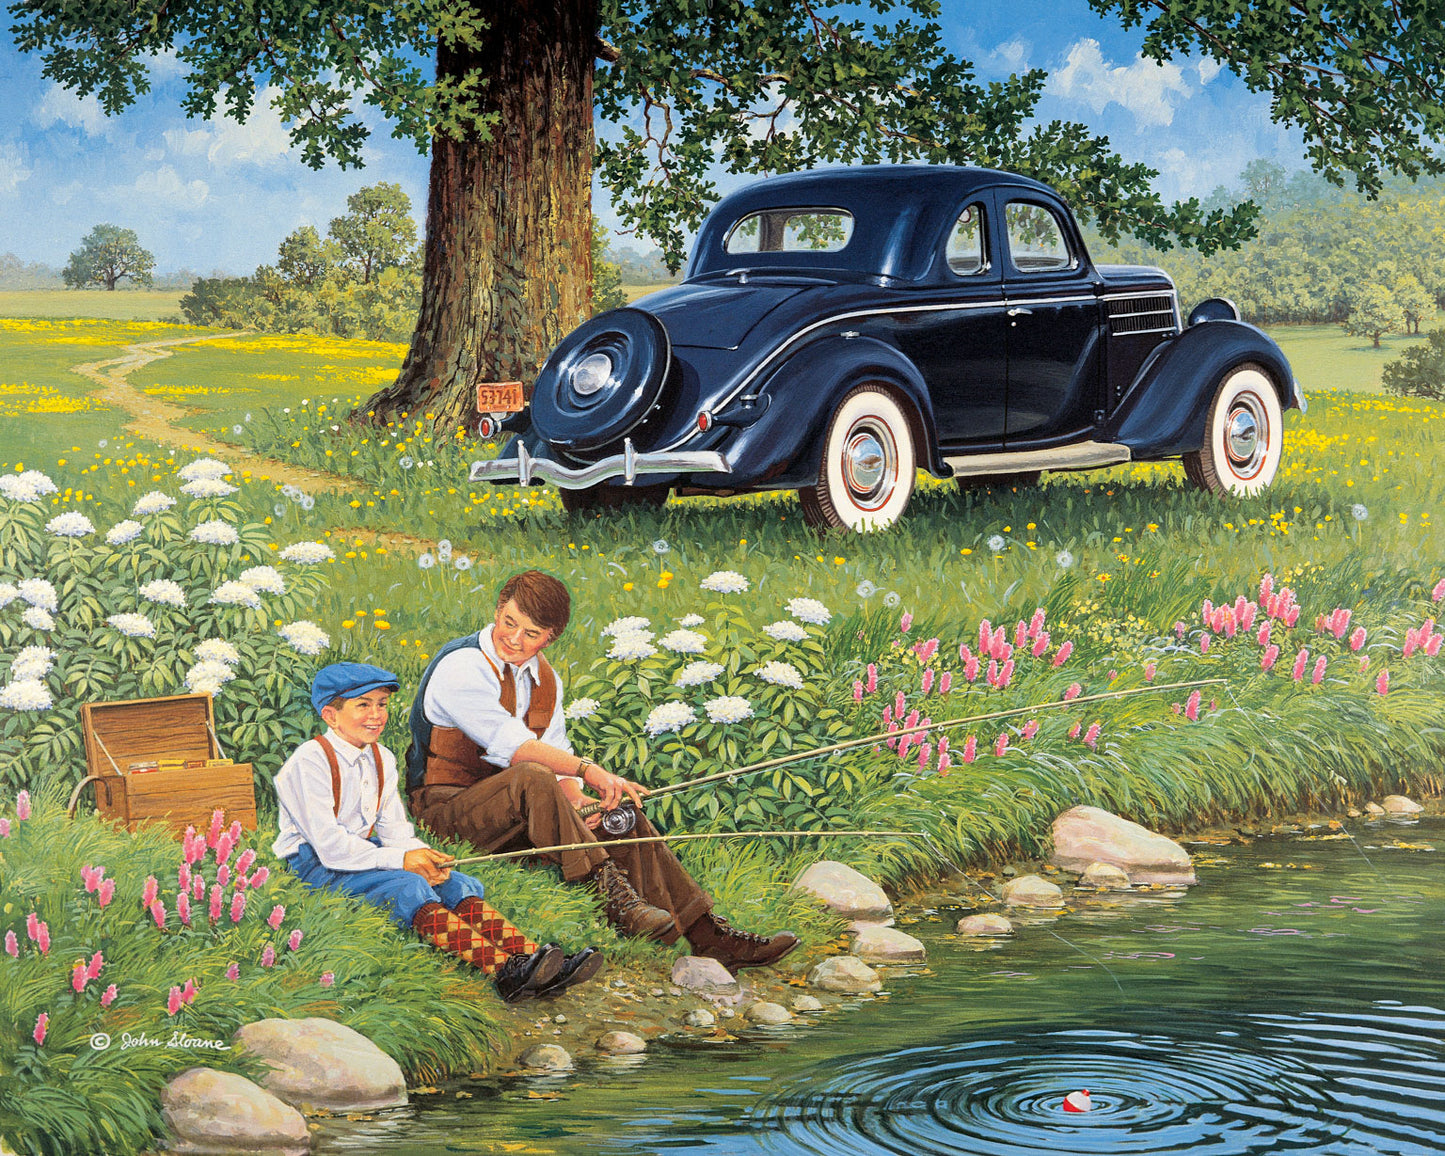 Father's Day - Puzzle by John Sloane